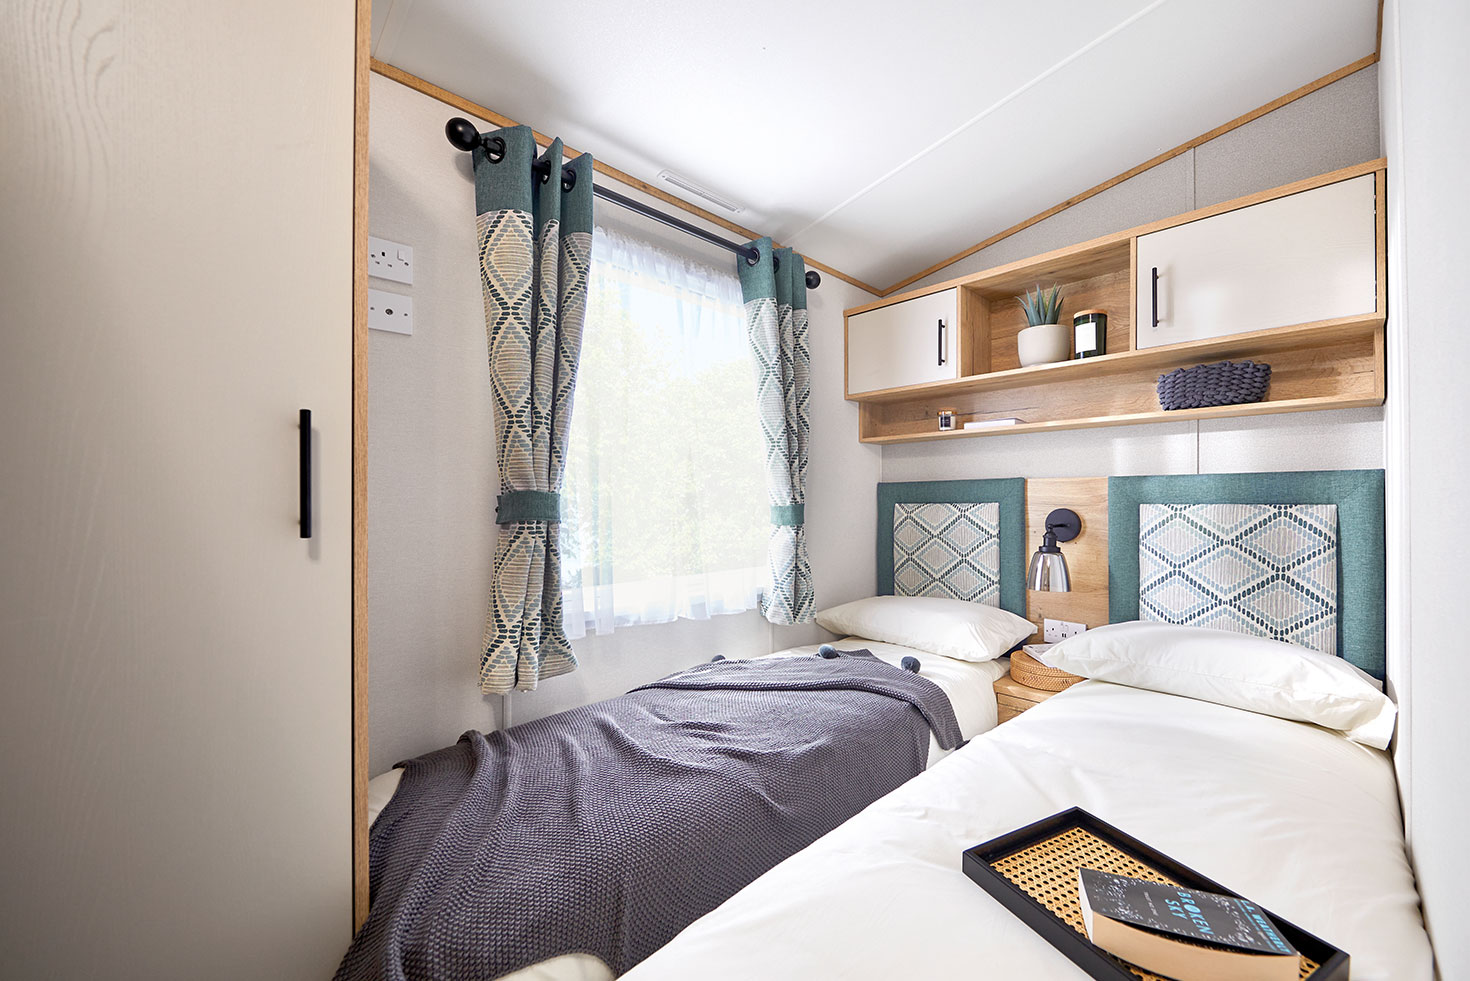 ABI Beverley 2022, brand new static caravan holiday lodge for sale Lake District